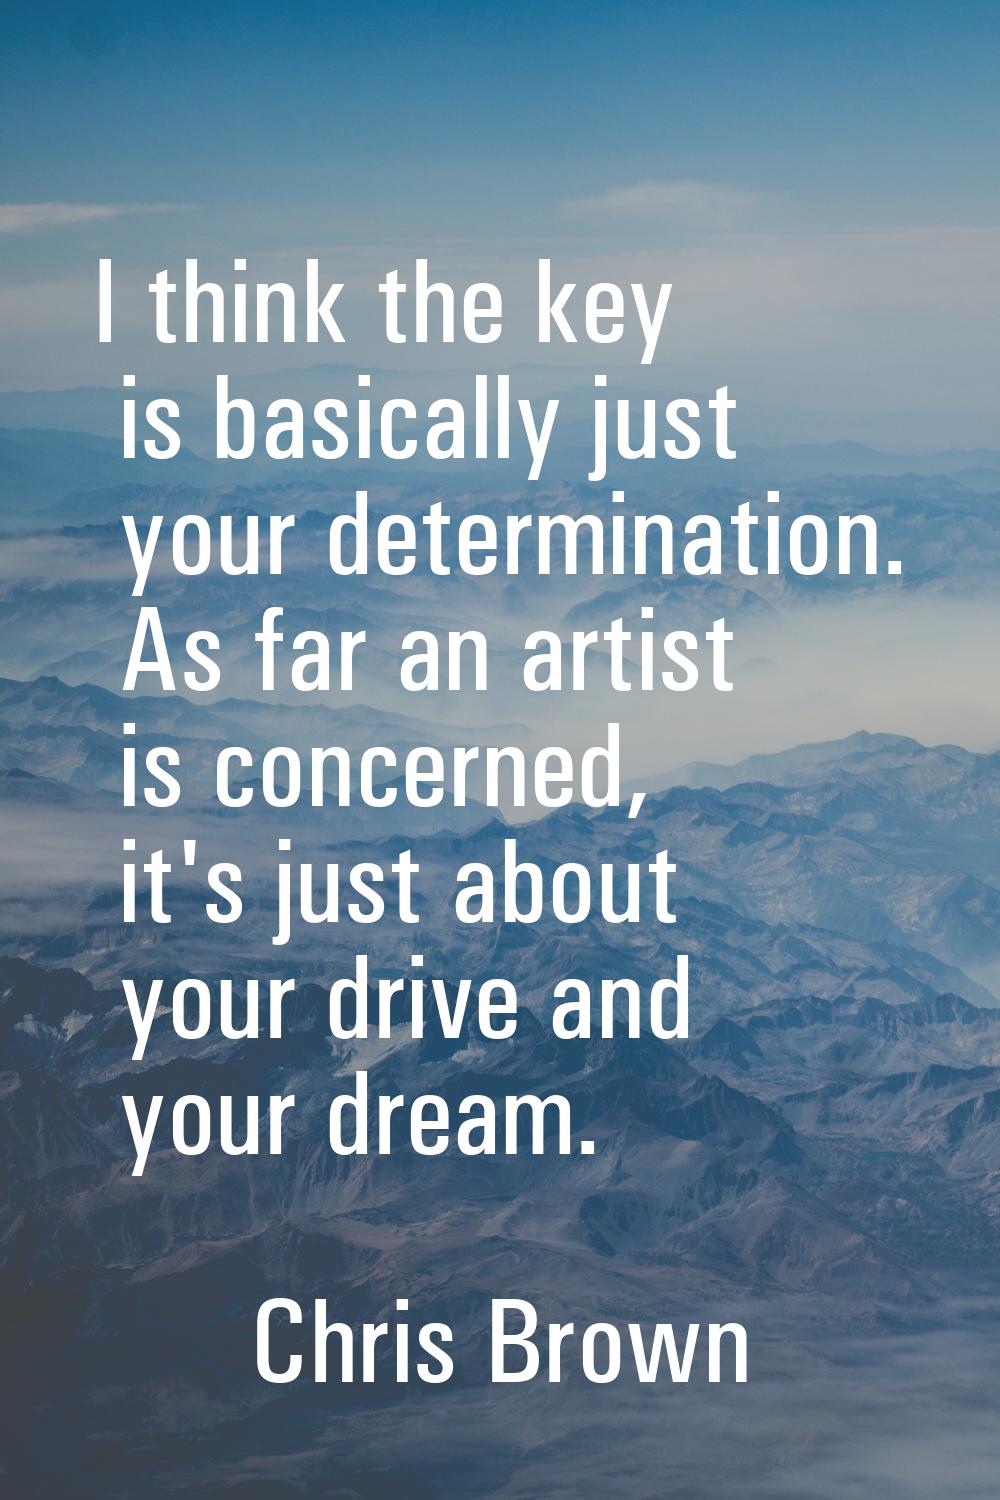 I think the key is basically just your determination. As far an artist is concerned, it's just abou